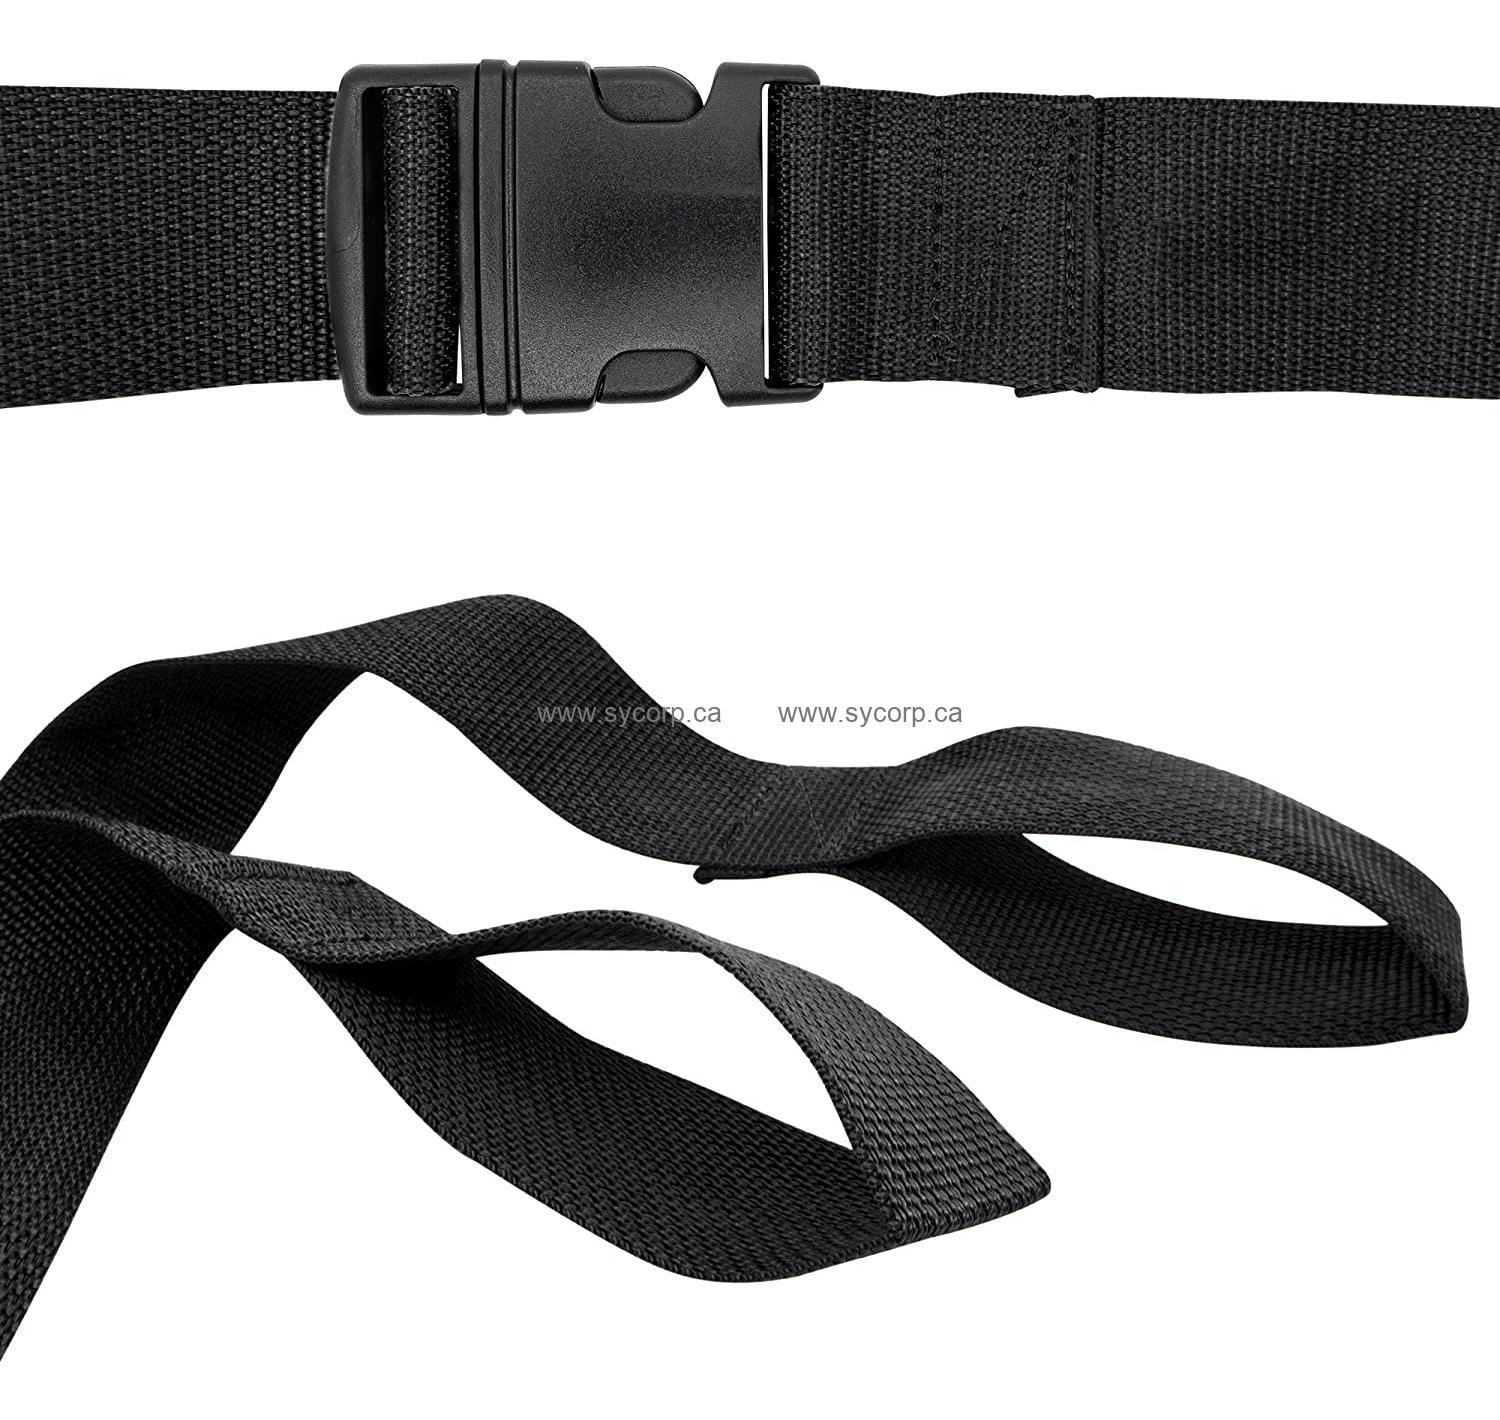 https://www.sycorp.ca/images/watermarked/1/thumbnails/1500/1420/detailed/8/fsfasspb6-3_stretcher_straps_buckle.jpeg